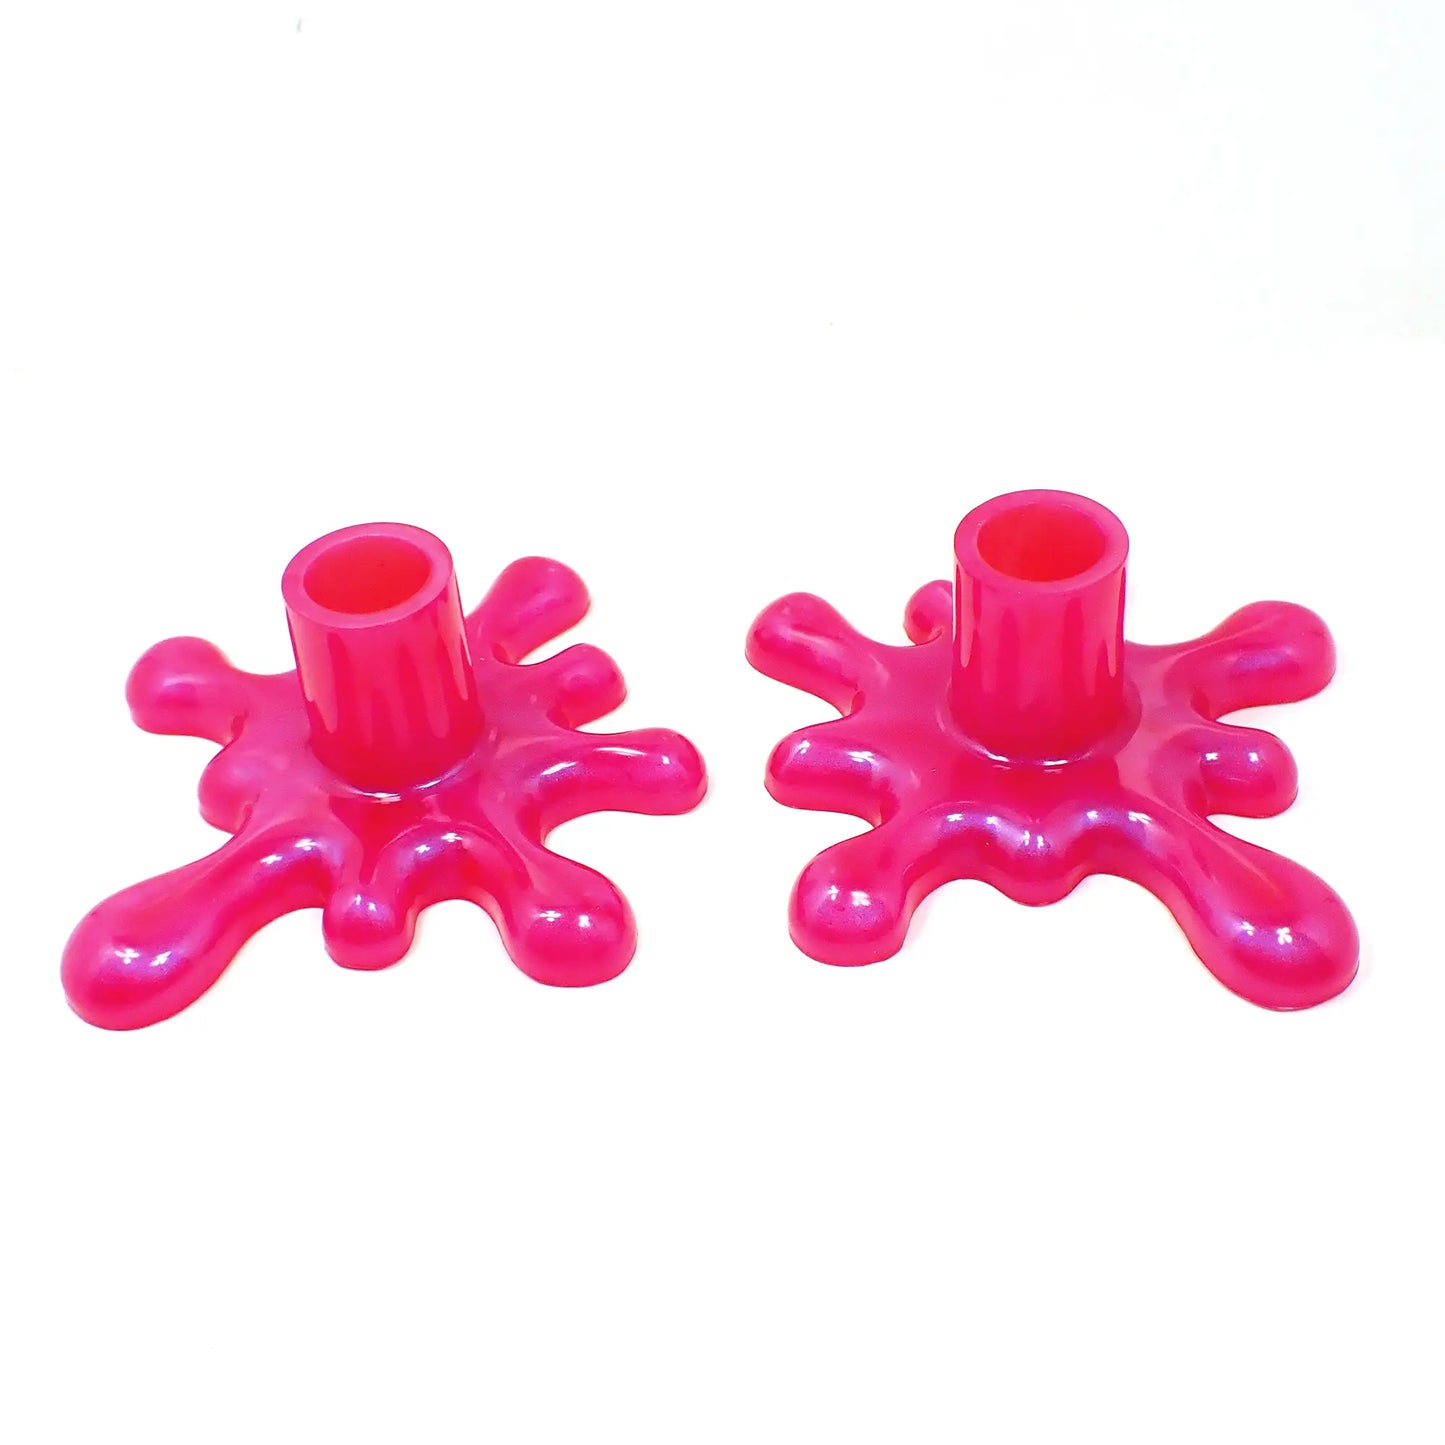 Angled view of the handmade resin larger sized splat style candlestick holders. They are bright pearly pink in color. The top part that holds the candle is round tube shaped. The bottom has a splat drip style design that is asymmetrical and has rounded ends. 